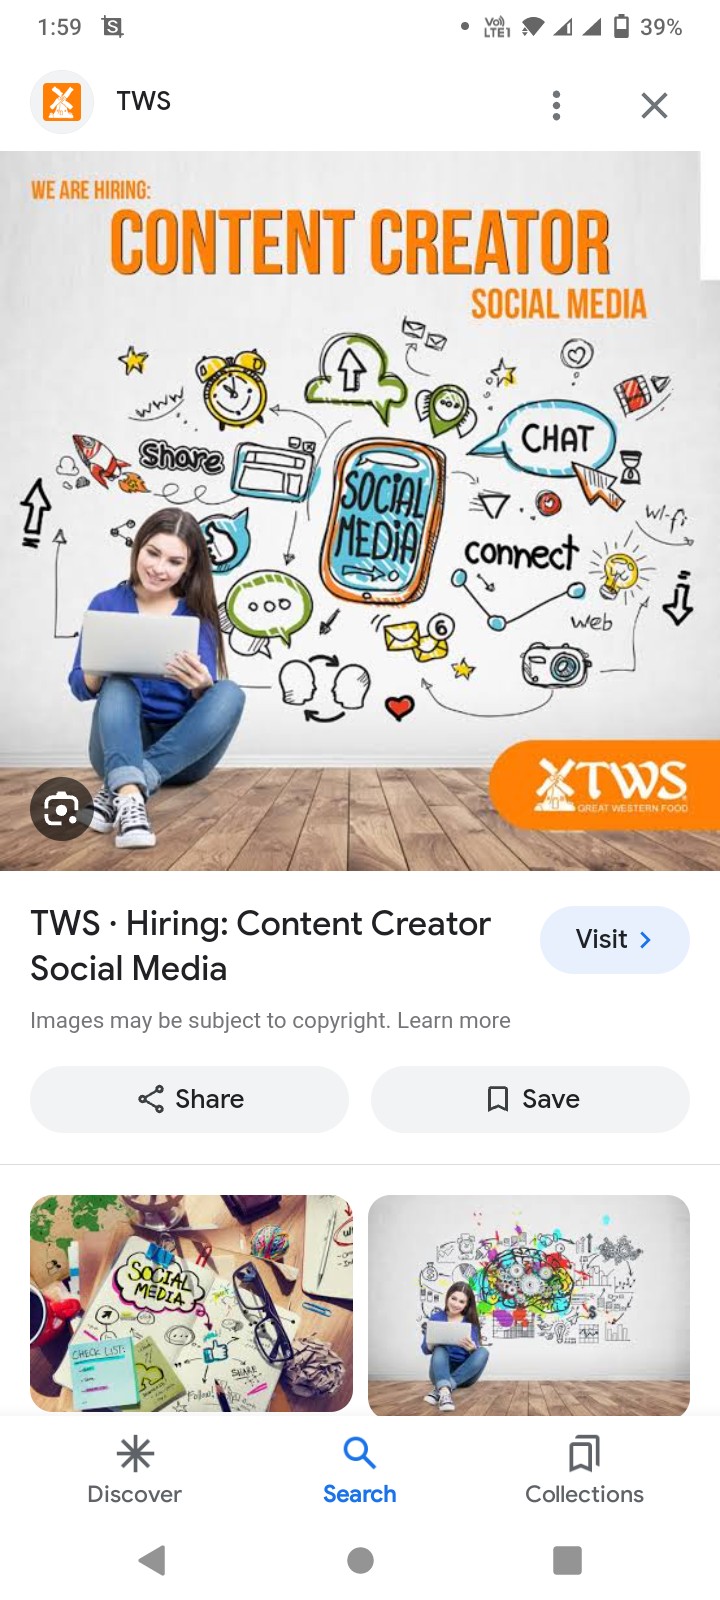 1:59 8 oh ® 0 .4039%

Ey ws Pox
~ CONTENT CREATOR

 

TWS - Hiring: Content Creator Visit >
Social Media

Images may be subject to copyright. Learn more

< Share J save

  

Collections

<4 ® a